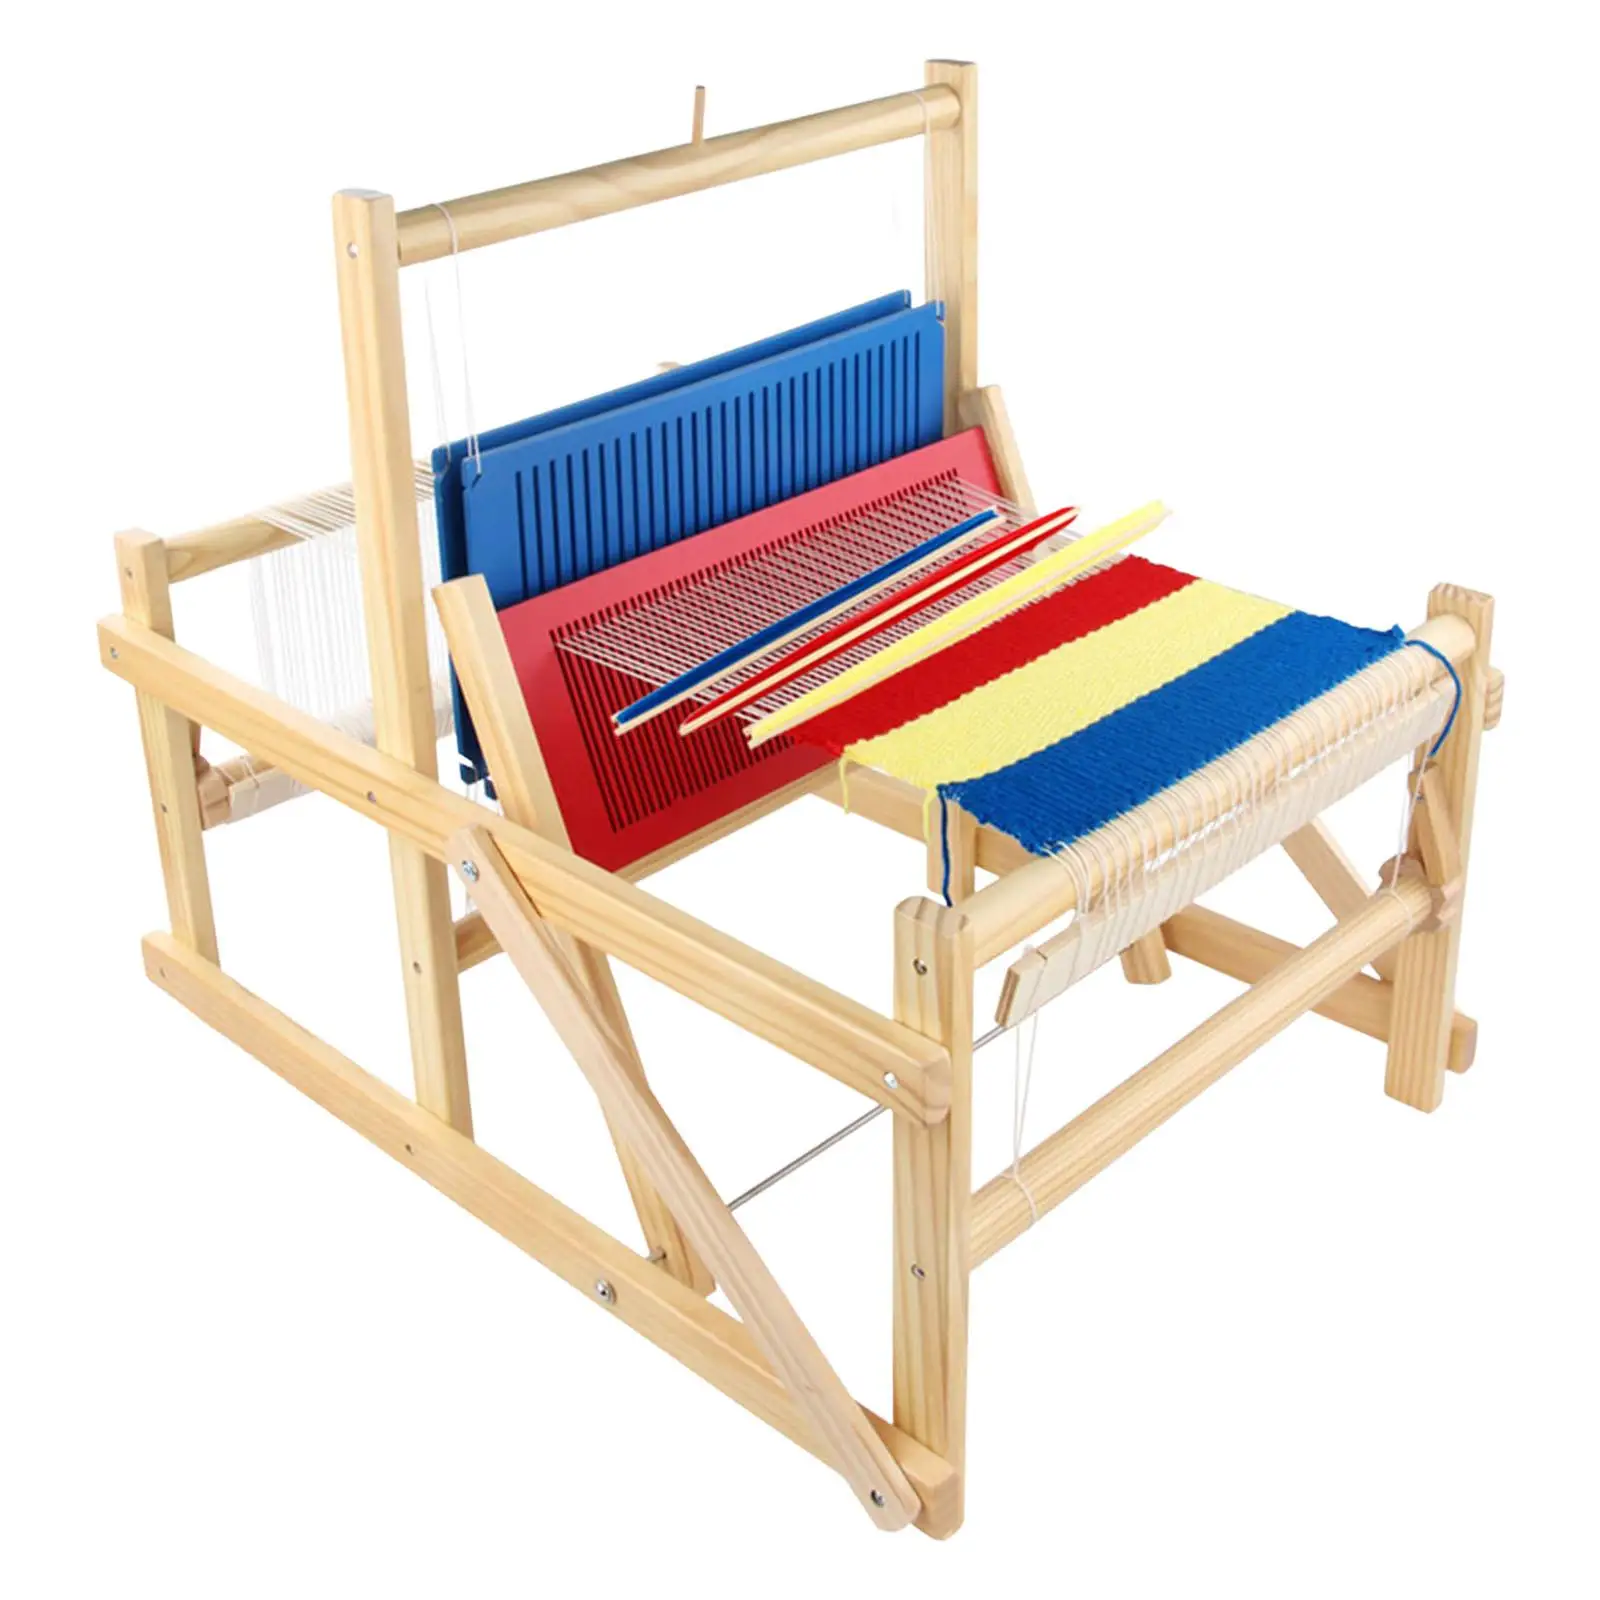 Weaving Loom for Kids and Adults Hand Knitting Wooden Weaving Loom Intellectual Toys for Kids